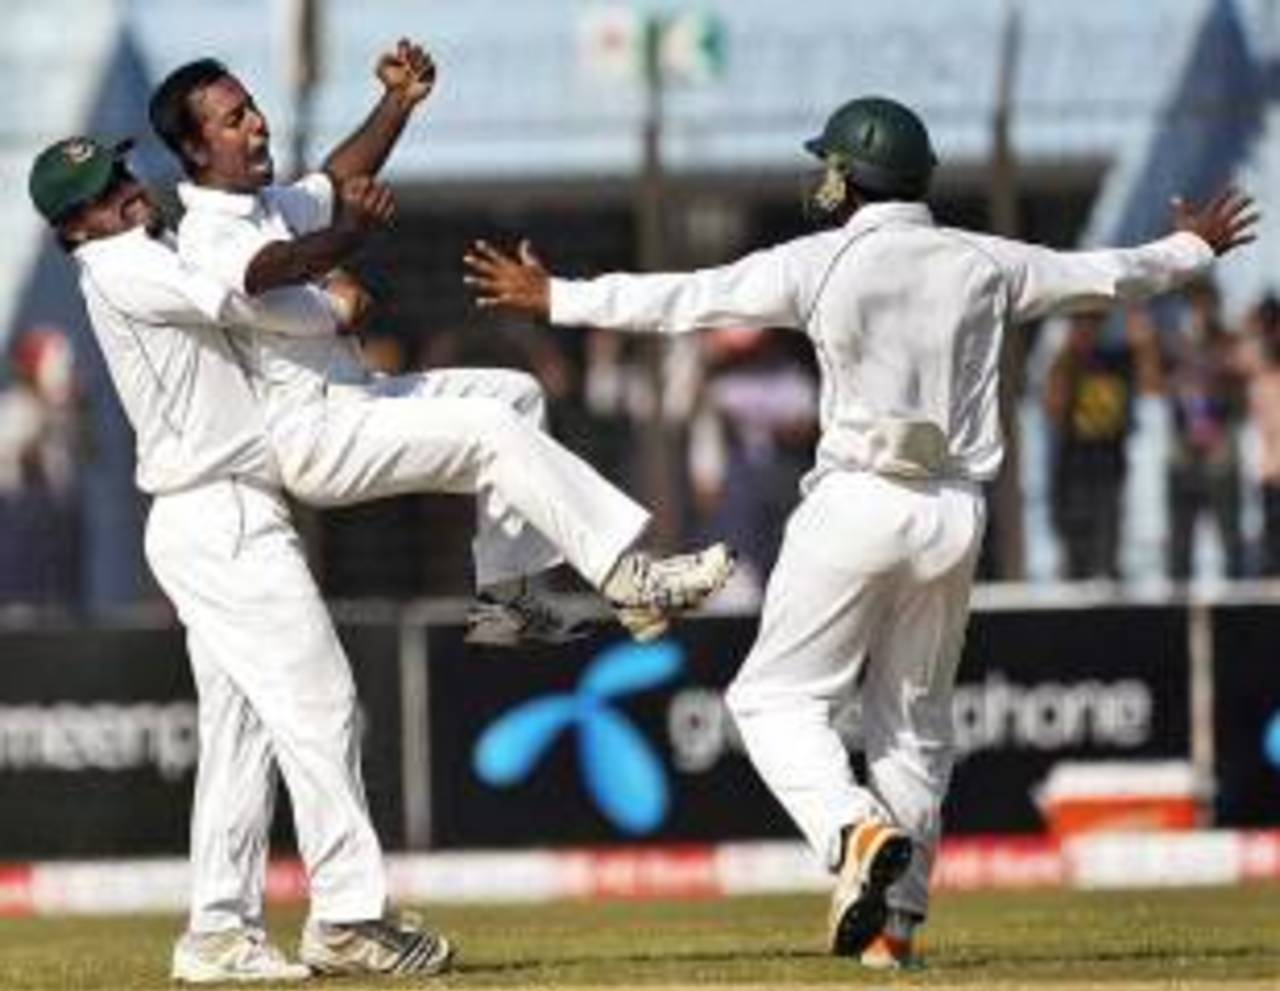 Elias Sunny celebrates his maiden Test wicket, Bangladesh v West Indies, 1st Test, Chittagong, 4th day, October 24, 2011